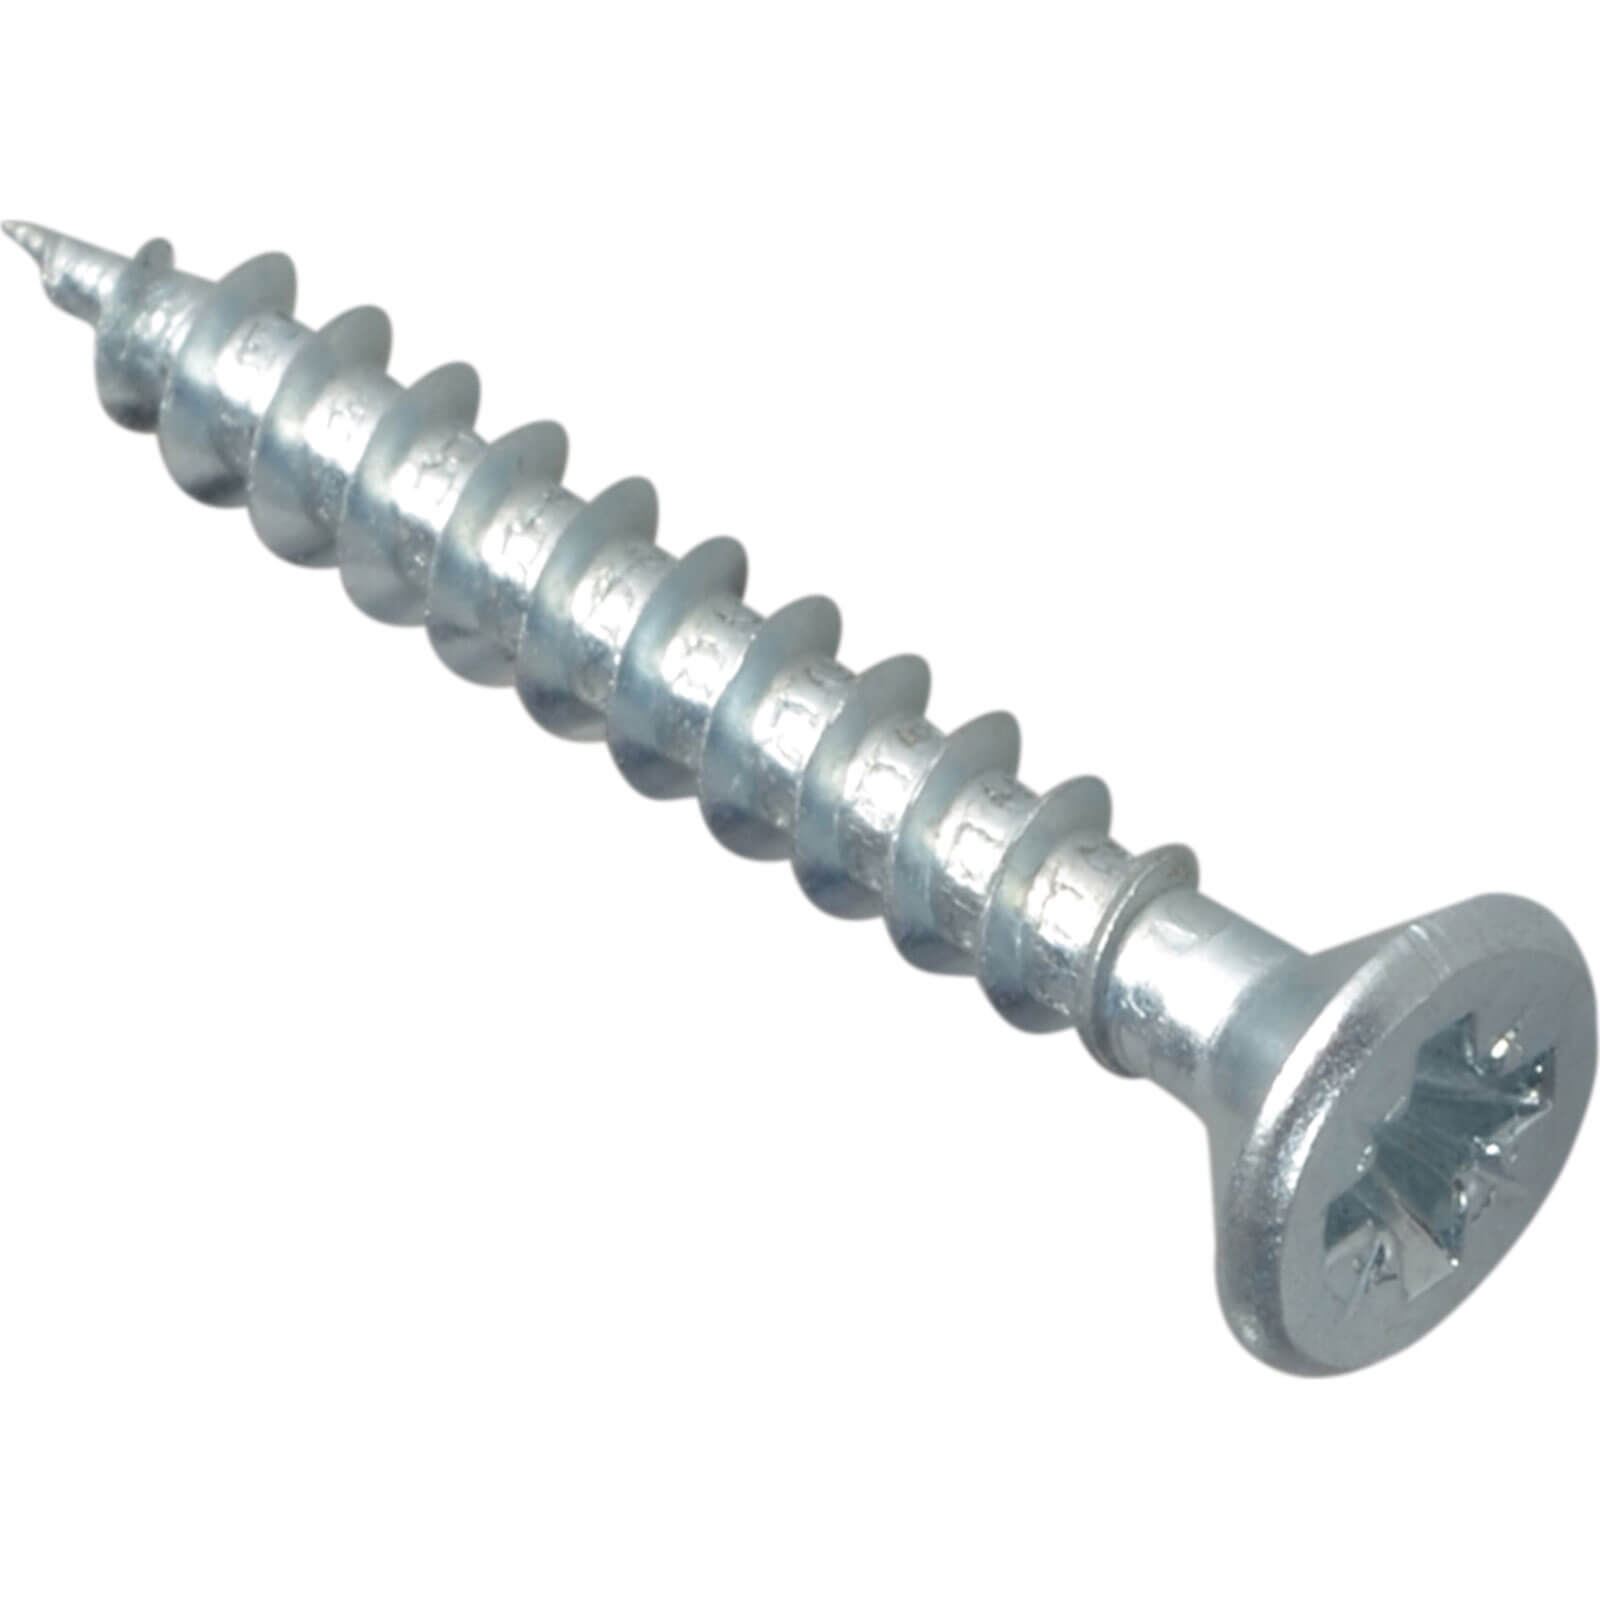 Image of Forgefix Multi Purpose Zinc Plated Screws 4mm 30mm Pack of 30